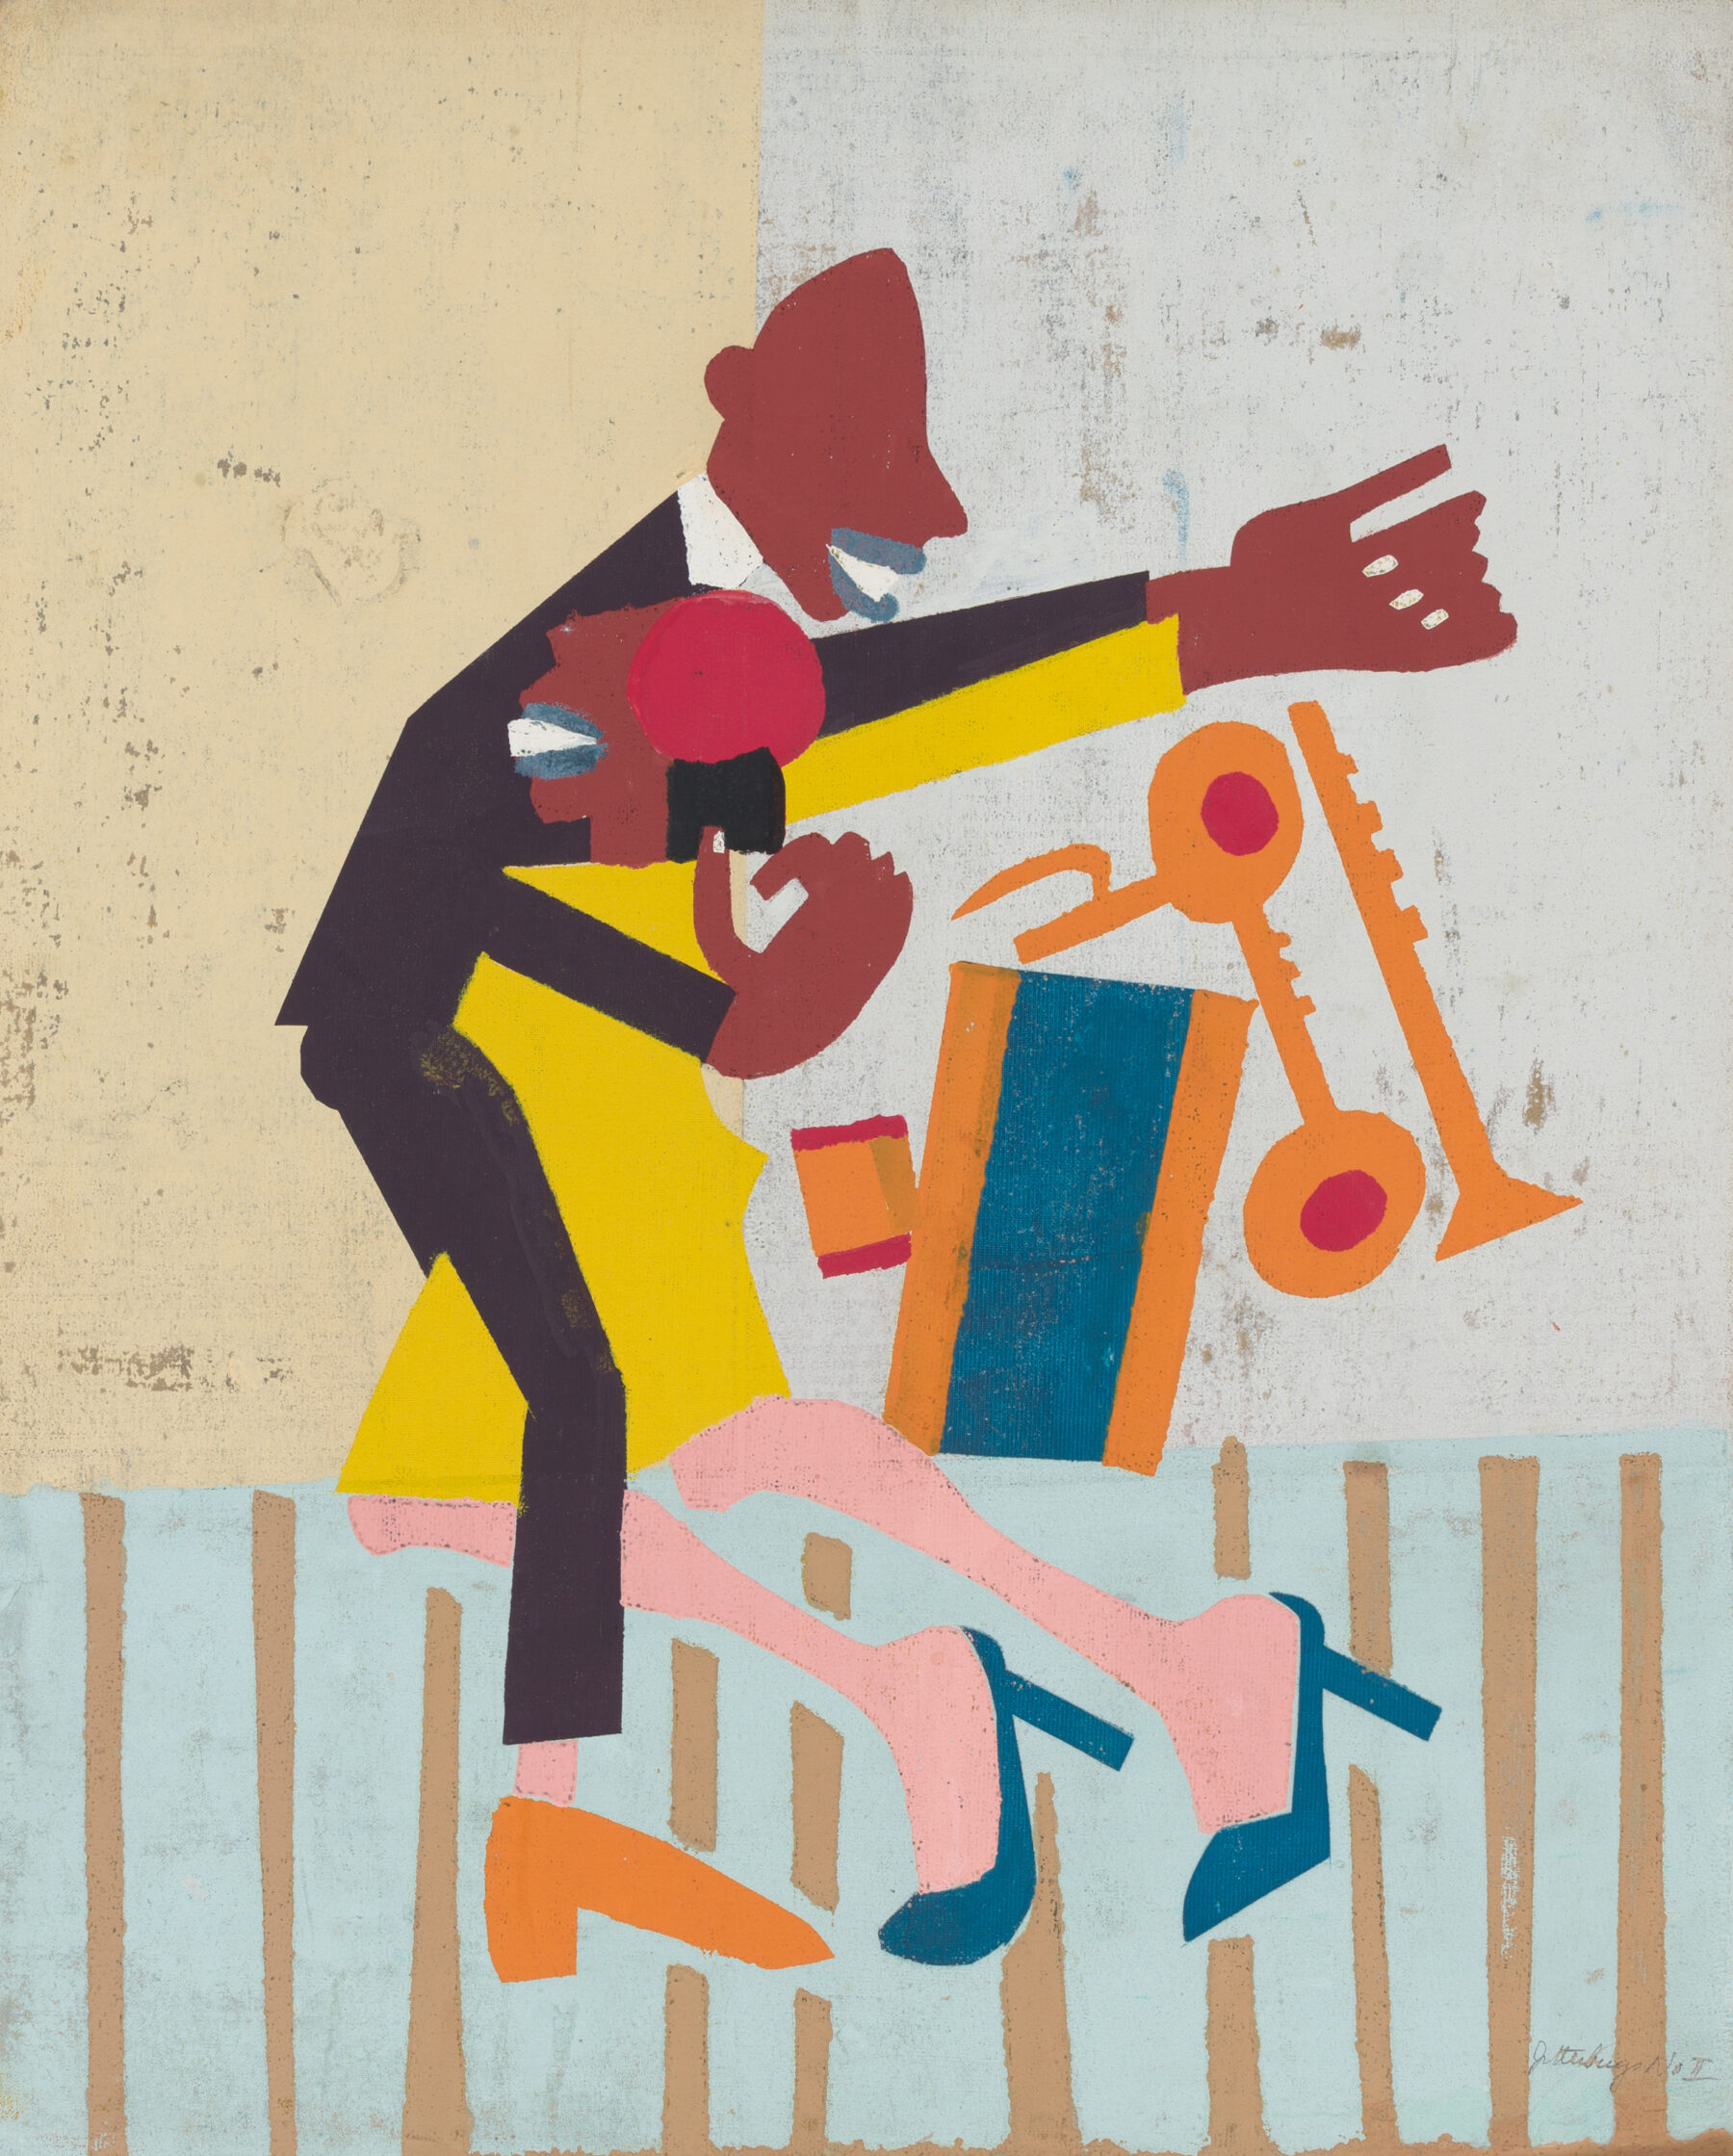 Dynamic and colorful shapes make up a couple dancing in the center of the image. There is a cubist trumpet and various other musical instruments present as well.